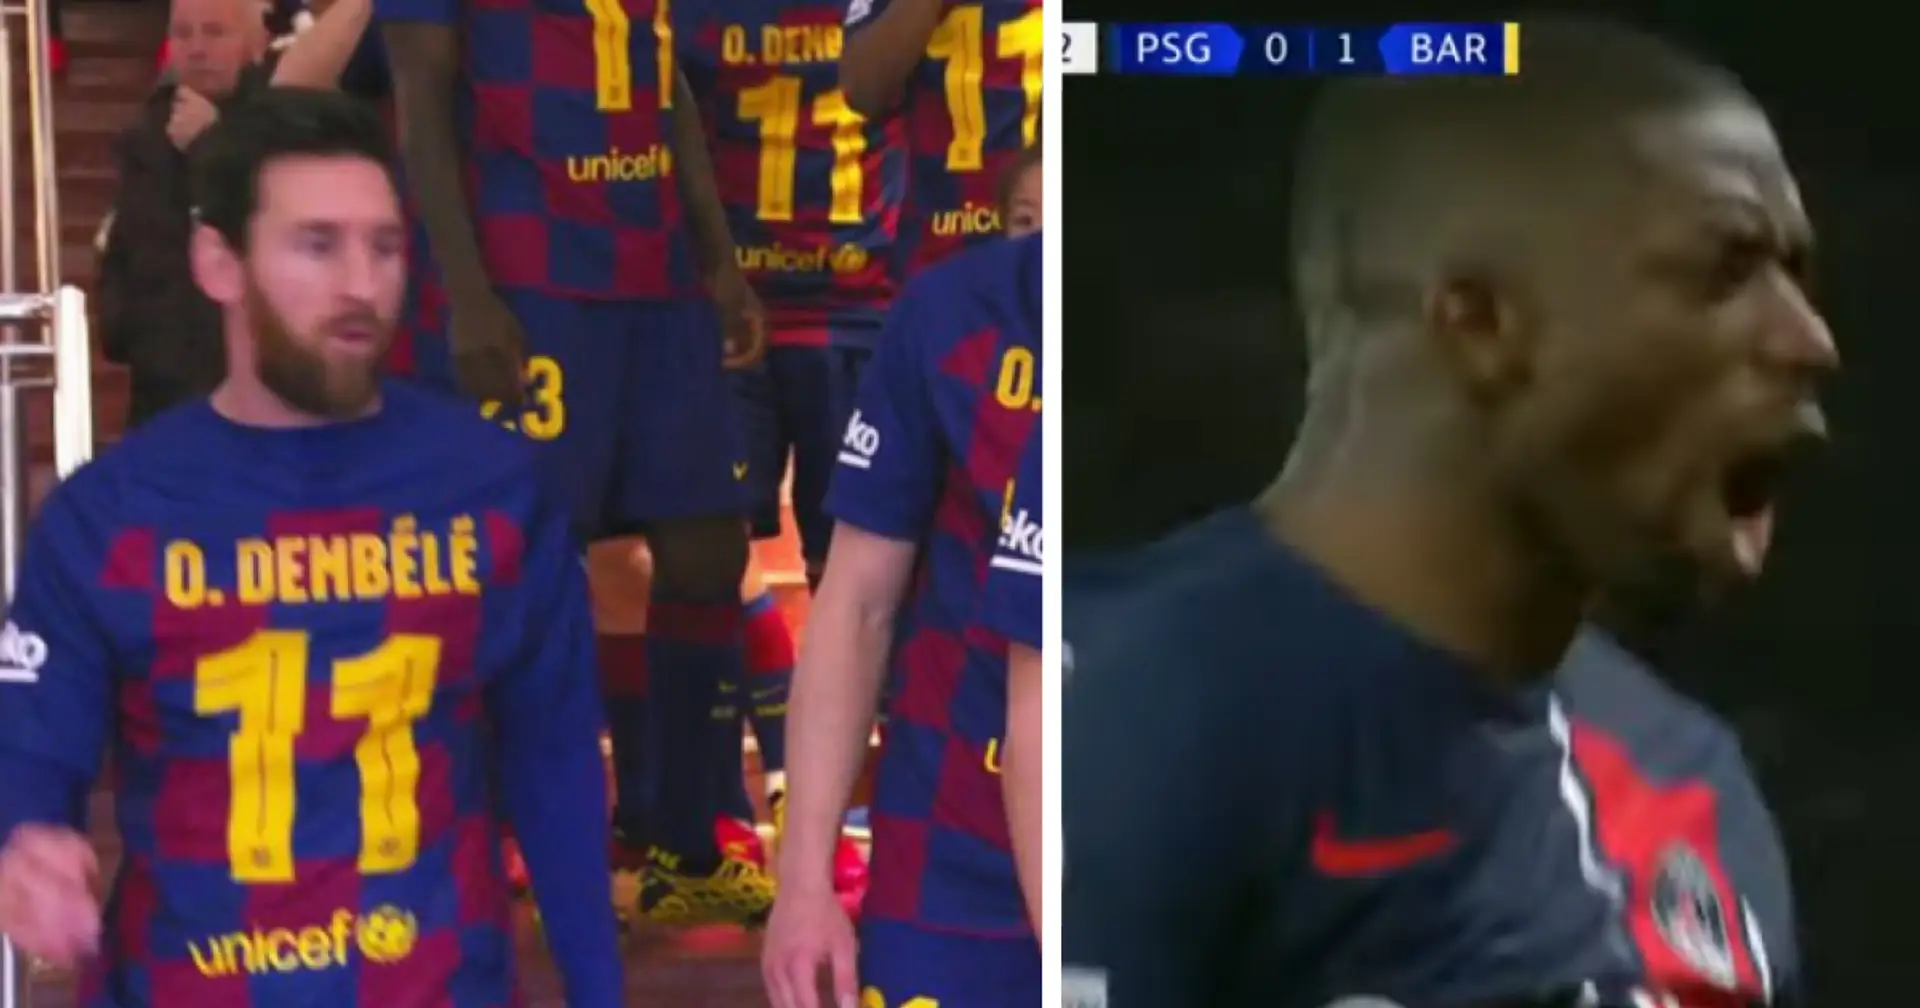 Pic of Messi and entire Barca squad wearing Dembele jerseys go viral